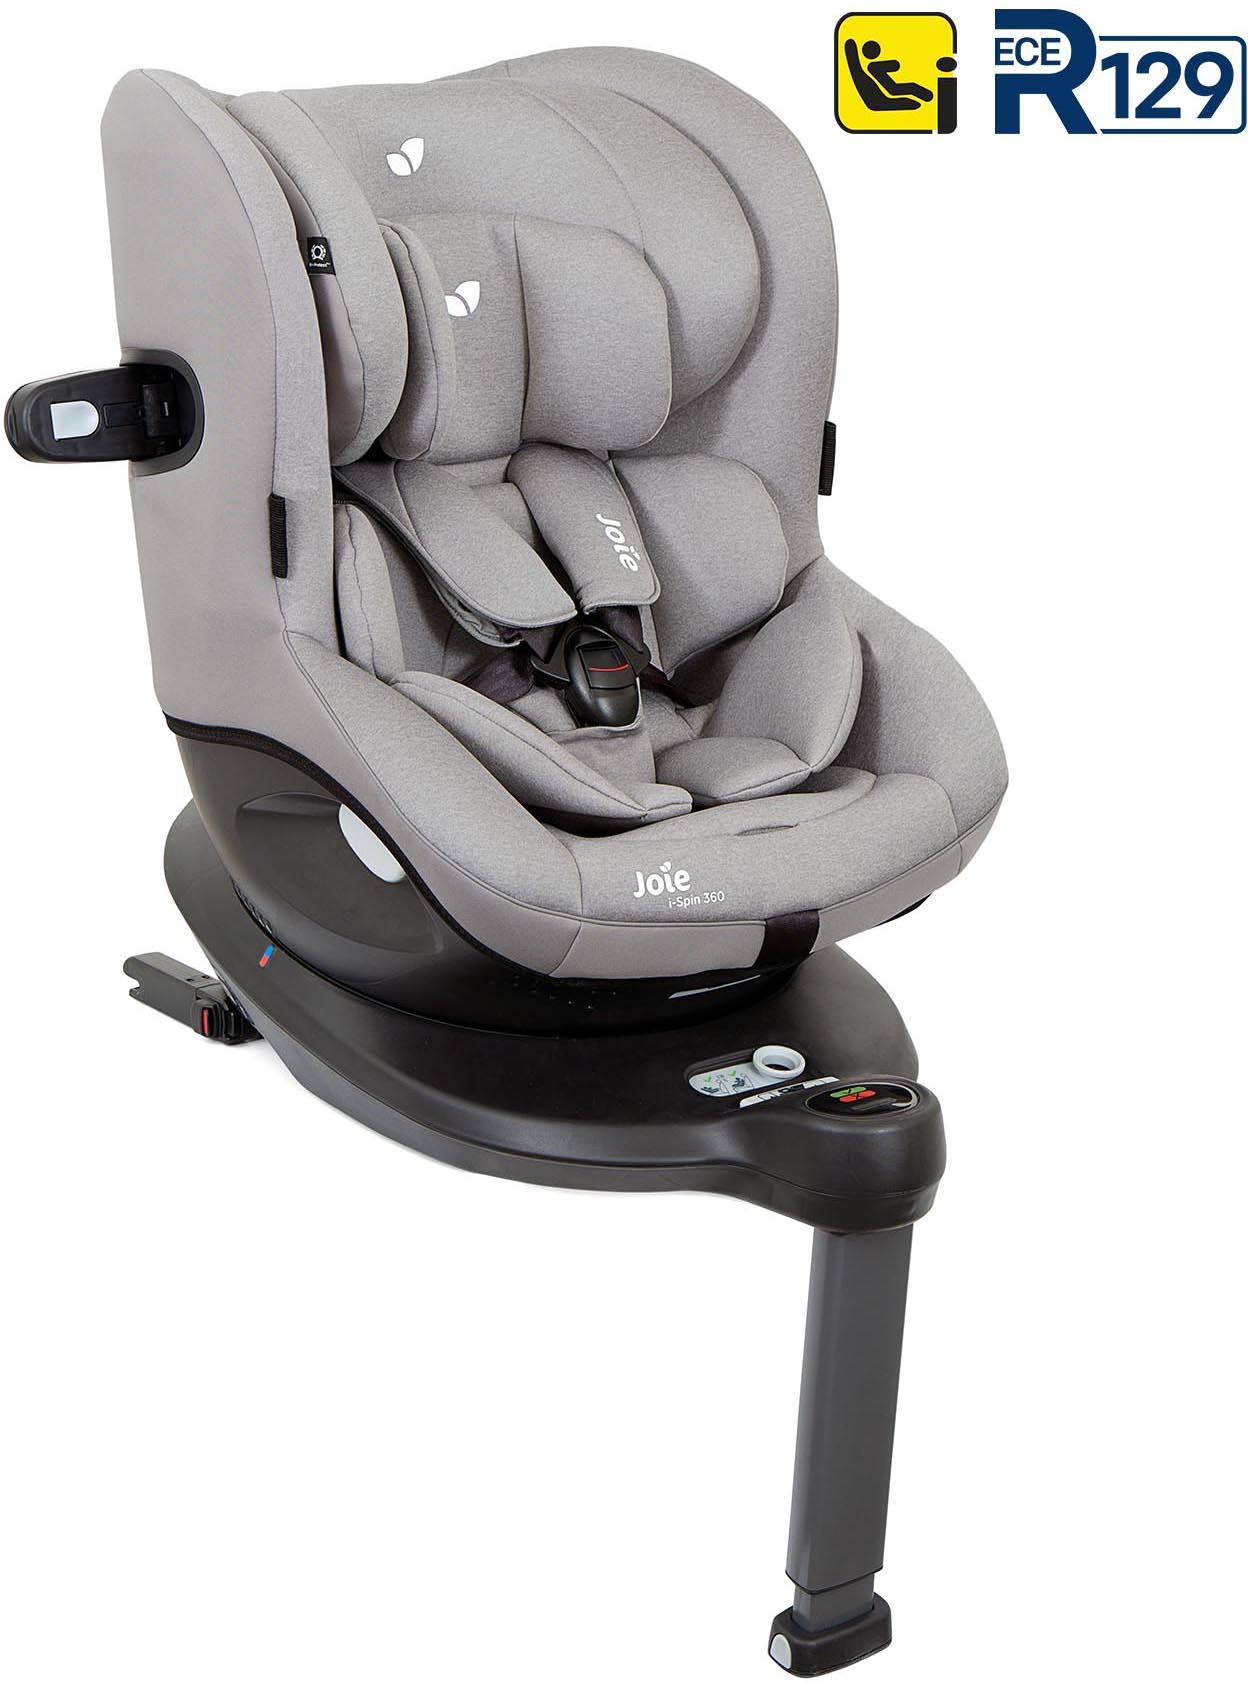 Joie I-Spin 360 Group 0+/1 Baby Car Seat - Grey Flannel